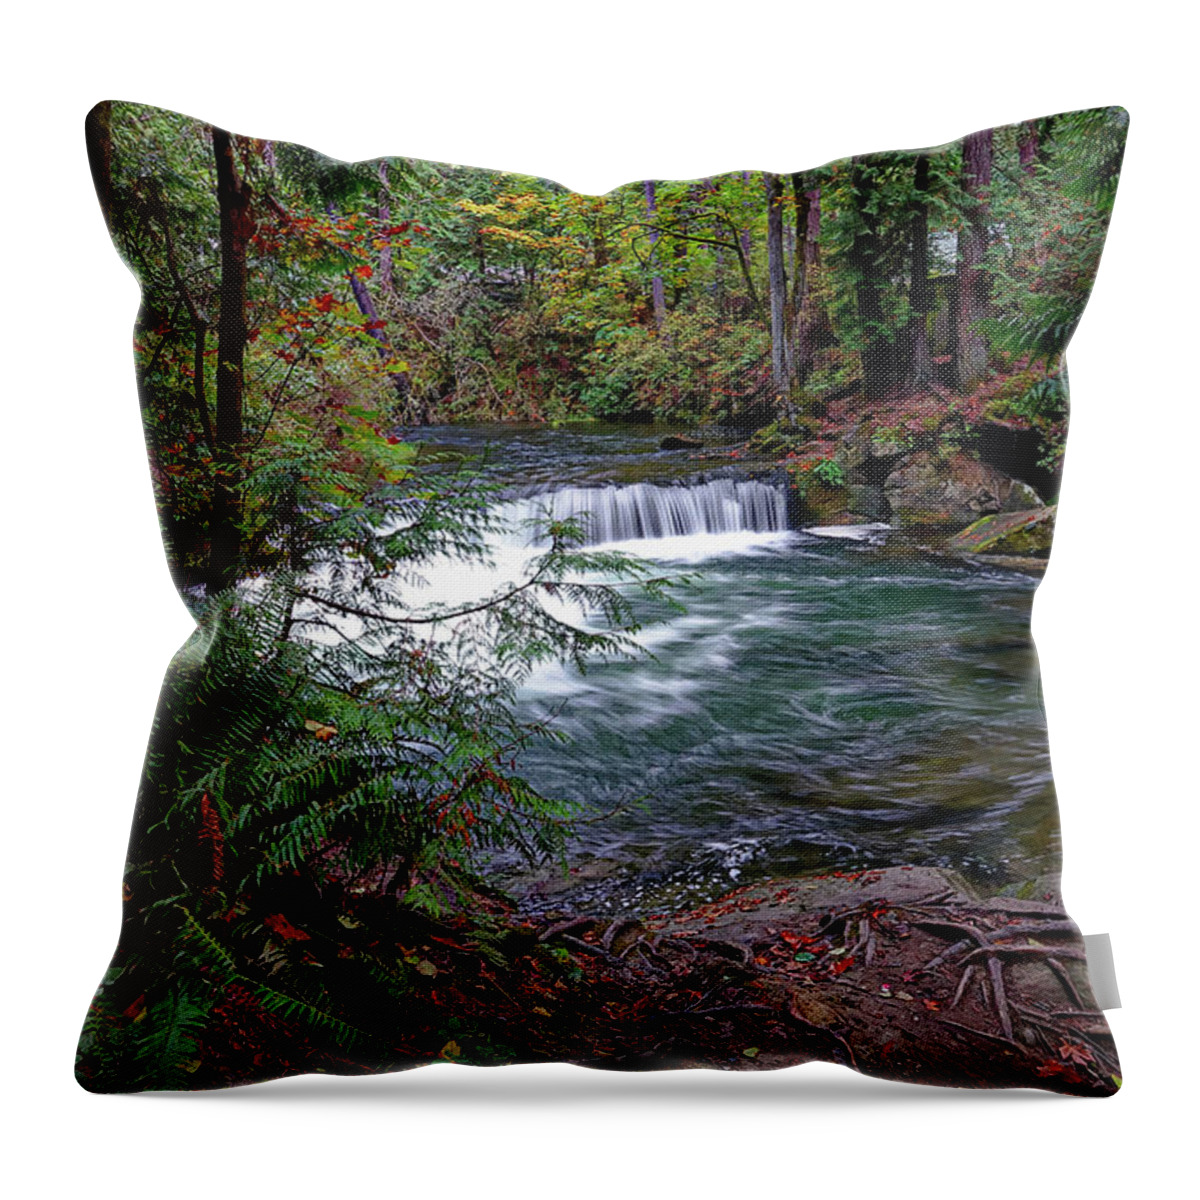 Waterfall Throw Pillow featuring the photograph Shady Falls by Rick Lawler